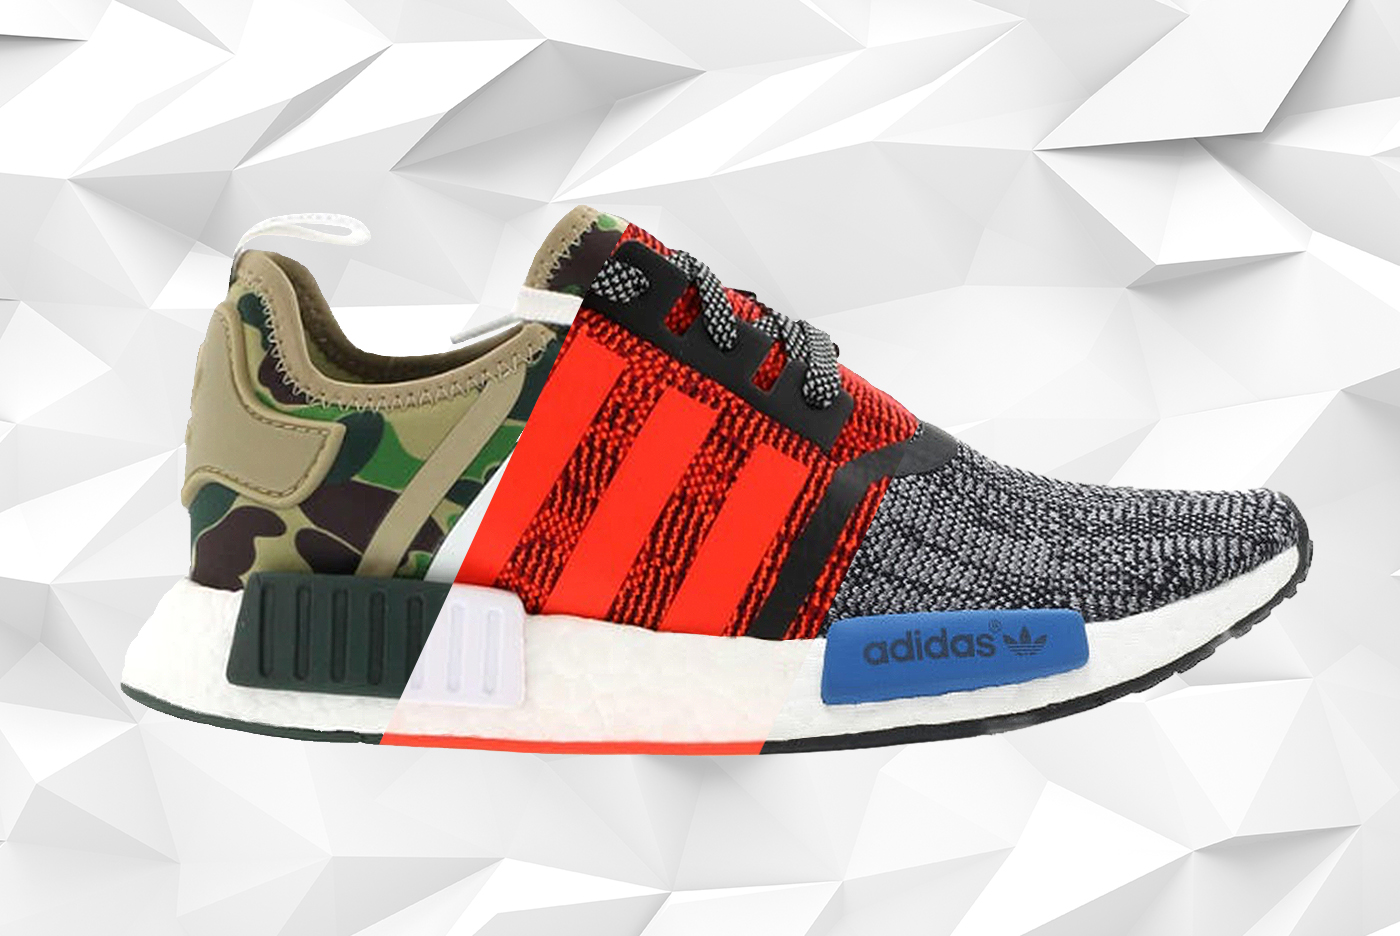 The Most Expensive adidas NMD Sneakers StockX News